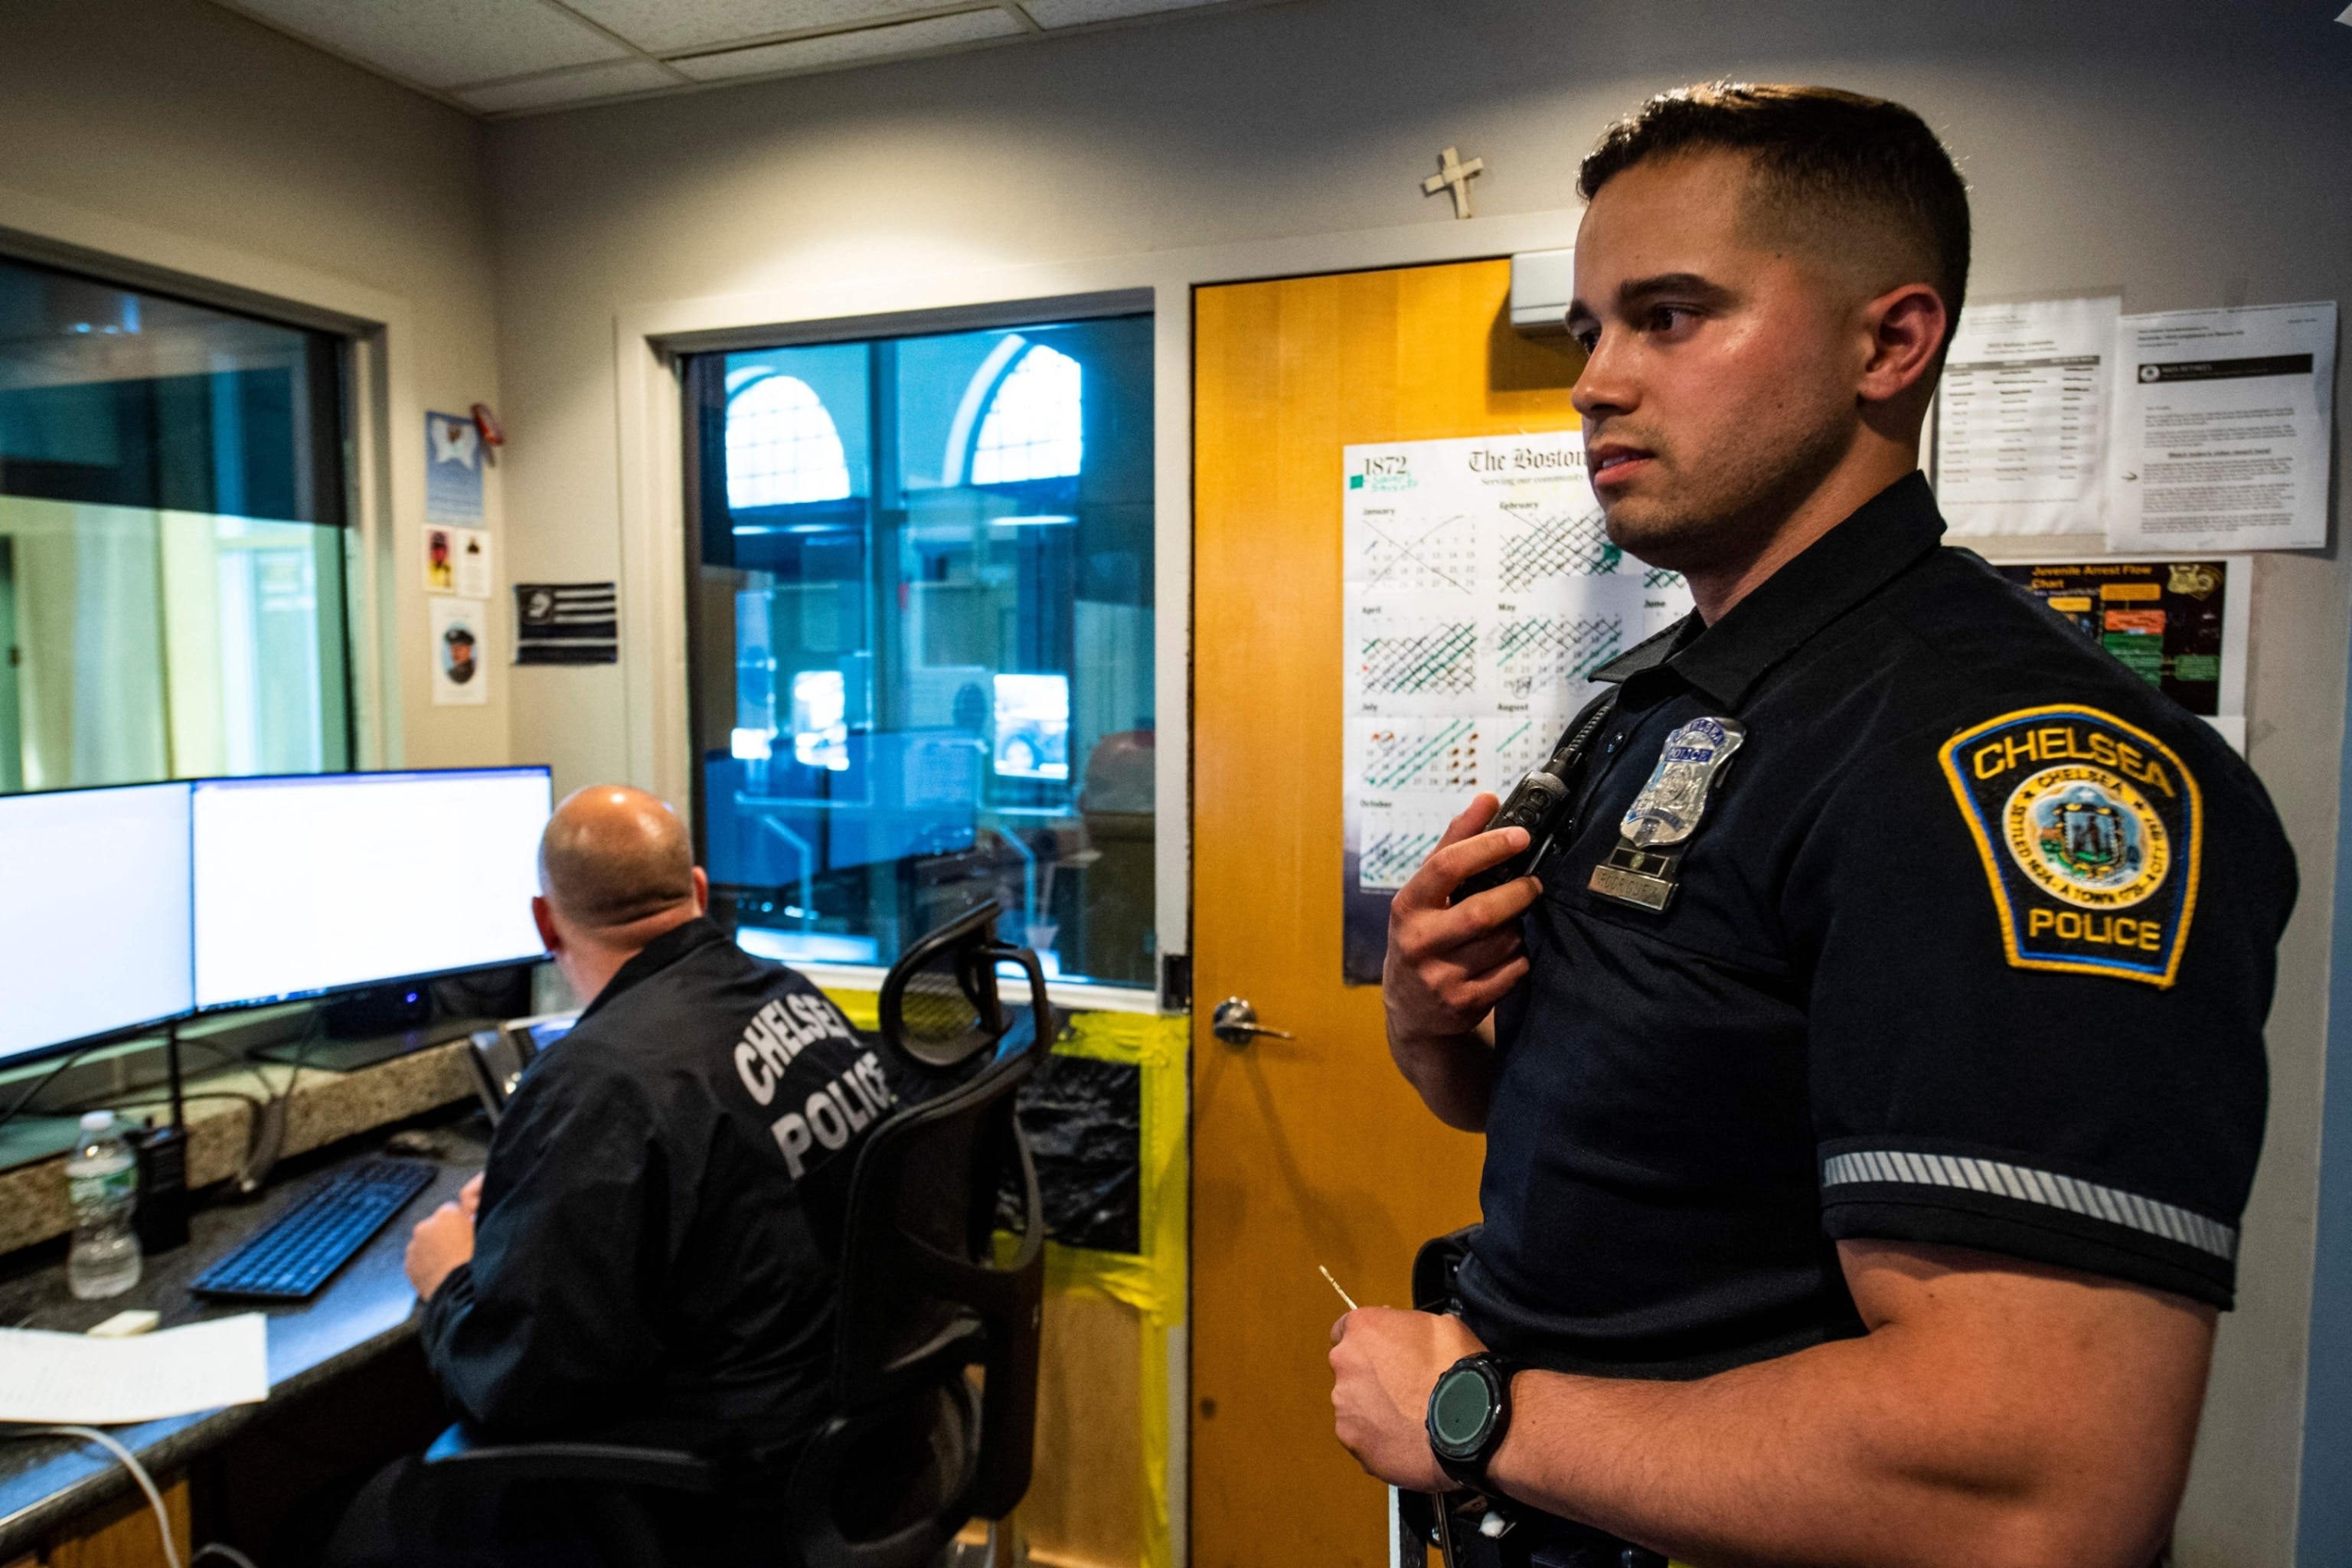 PHOTO: Officer Jose Rodriguez, 32 (R), responds to a call on his radio while inside the dispatch room at the police station in Chelsea, Mass., May 13, 2022.